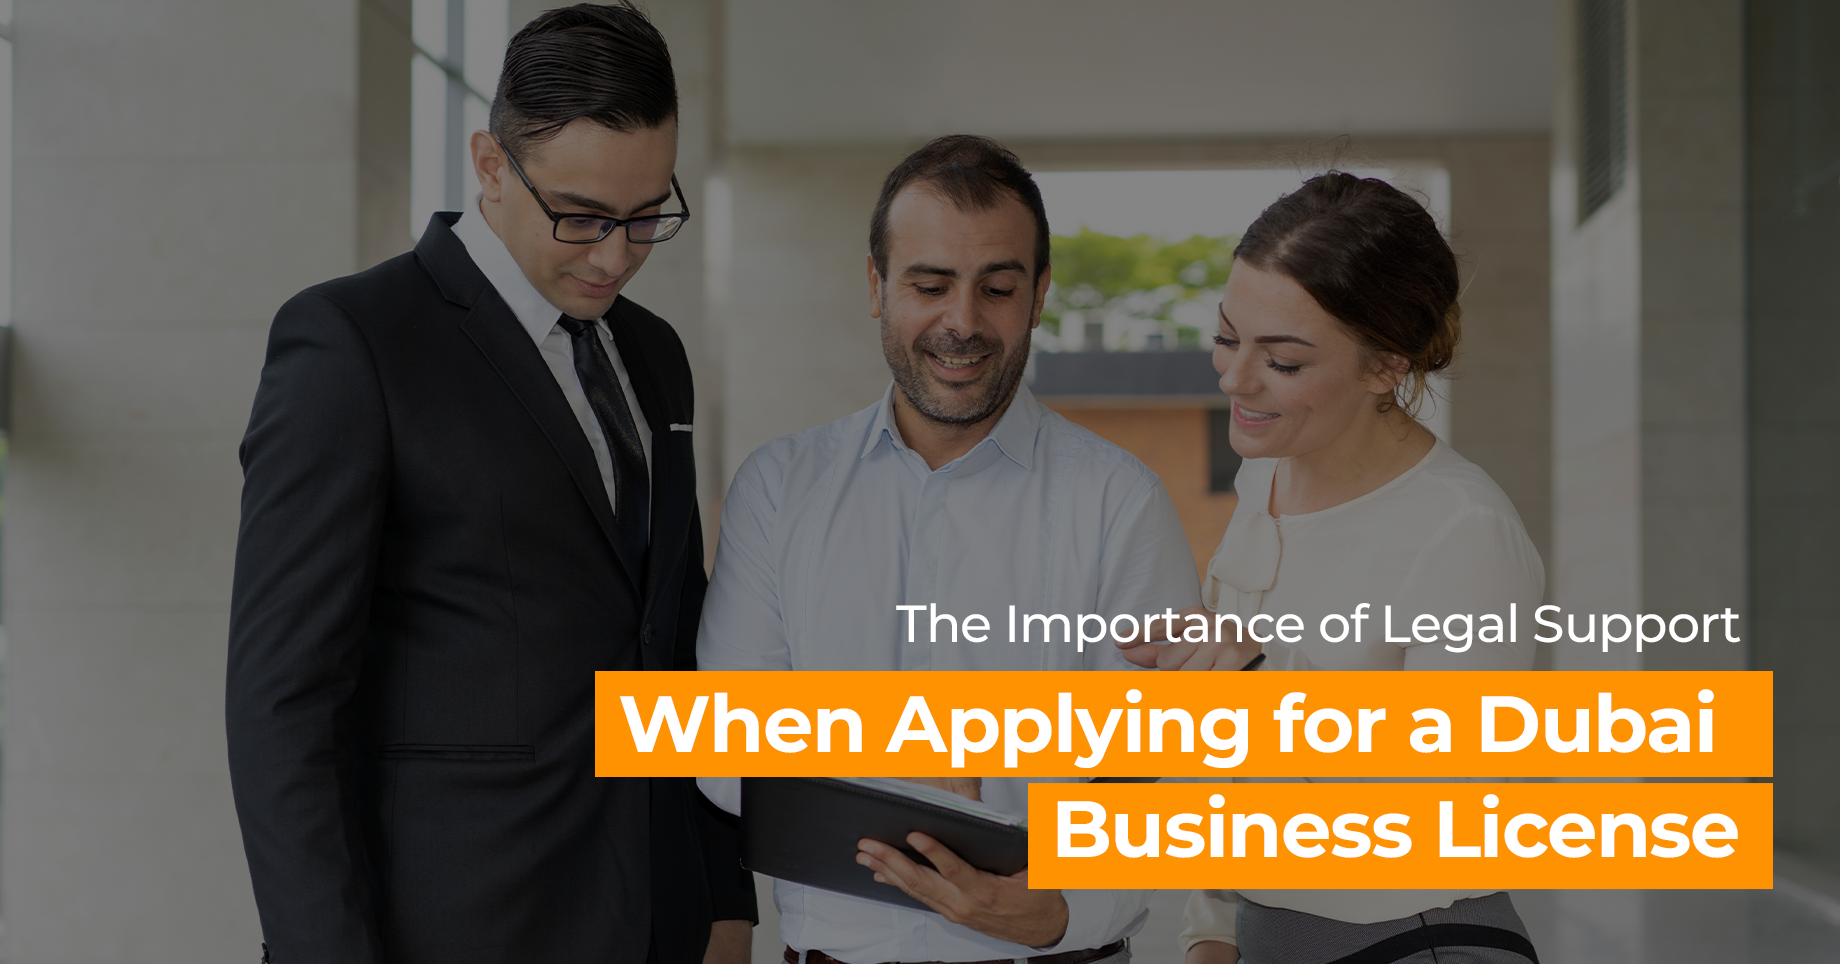 The Importance of Legal Support When Applying for a Dubai Business License